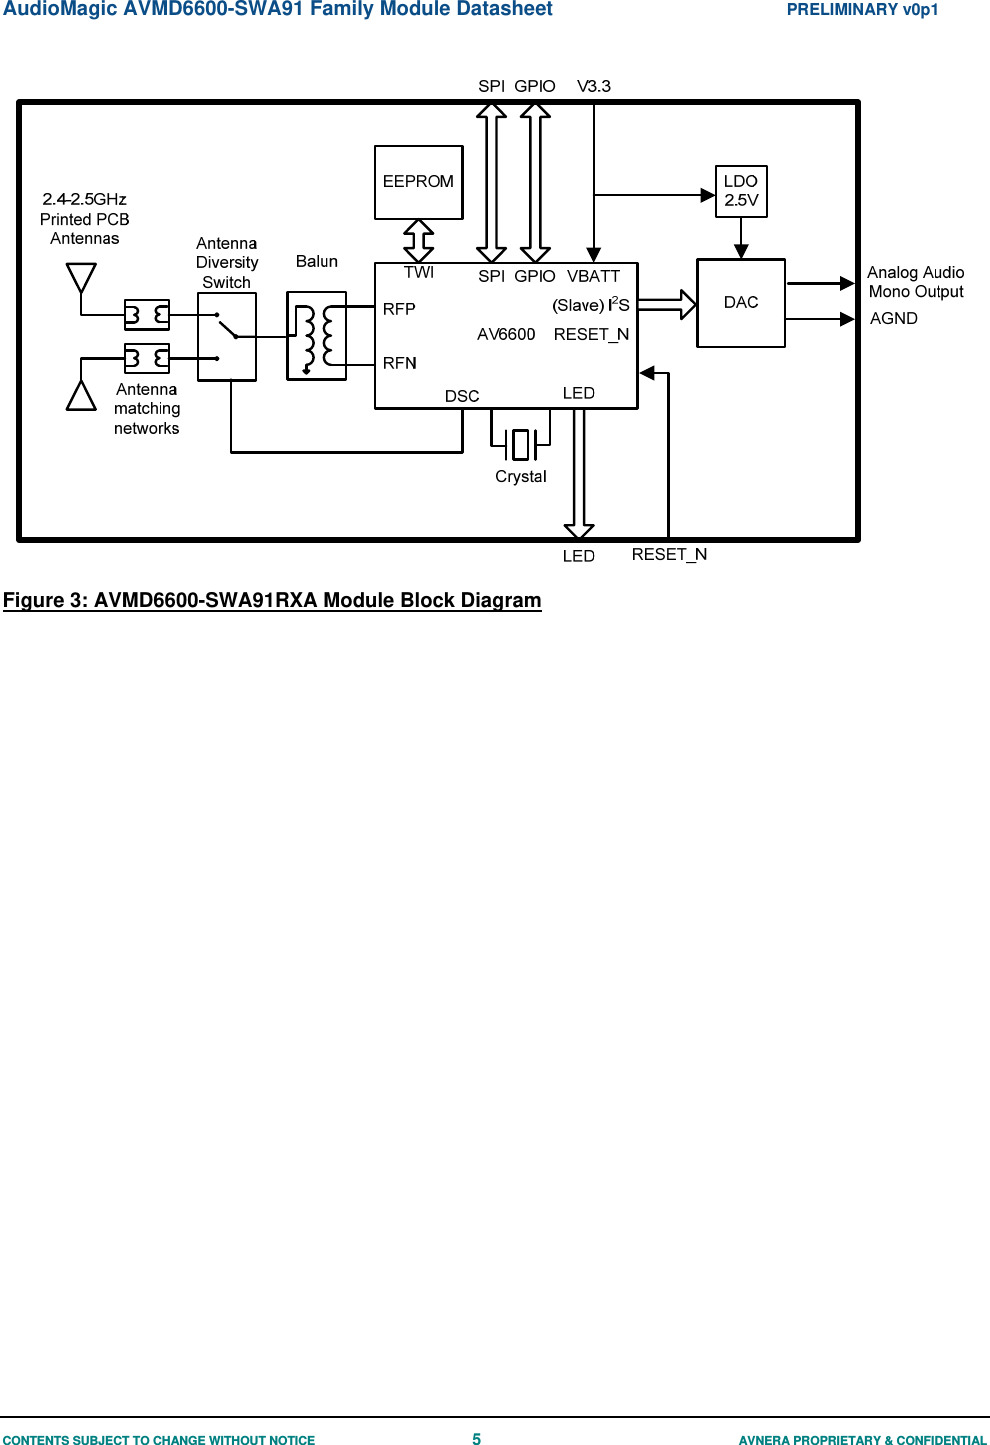 AudioMagic AVMD6600-SWA91 Family Module Datasheet  PRELIMINARY v0p1 CONTENTS SUBJECT TO CHANGE WITHOUT NOTICE  5  AVNERA PROPRIETARY &amp; CONFIDENTIAL   Figure 3: AVMD6600-SWA91RXA Module Block Diagram                   